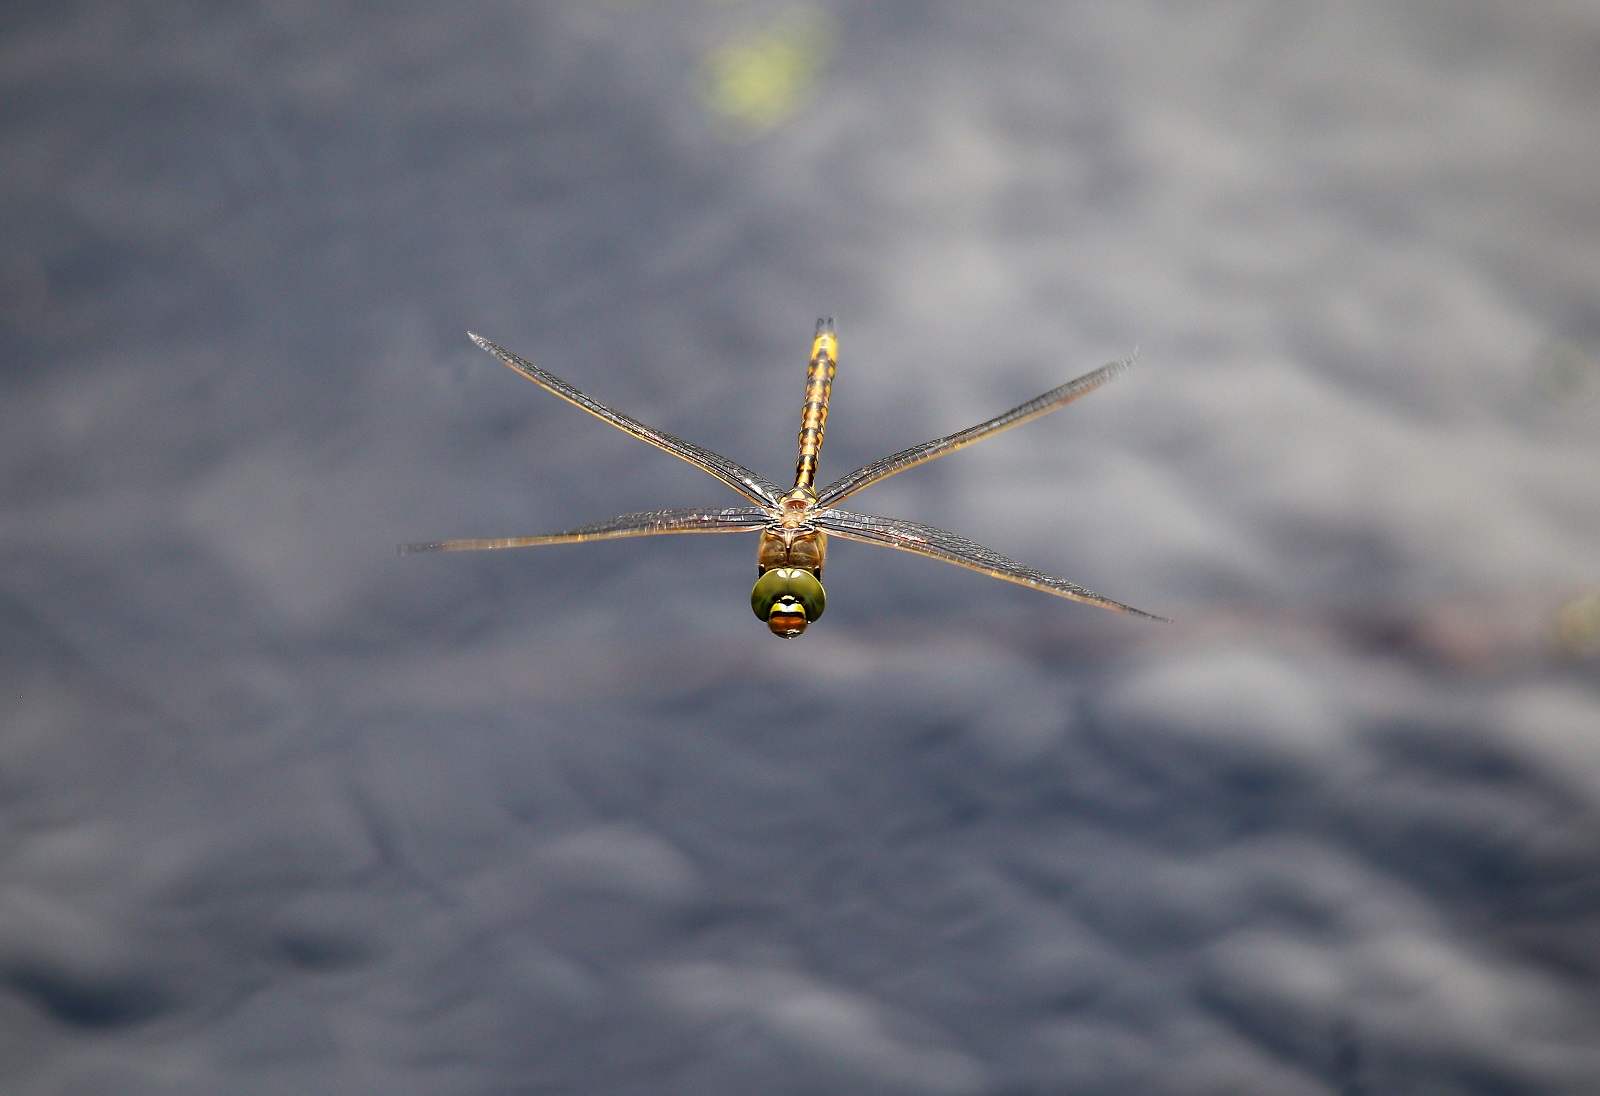 Our people capturing the world around us. An image of a Australian Emperor dragonfly (Hemianax papuensis) in flight.